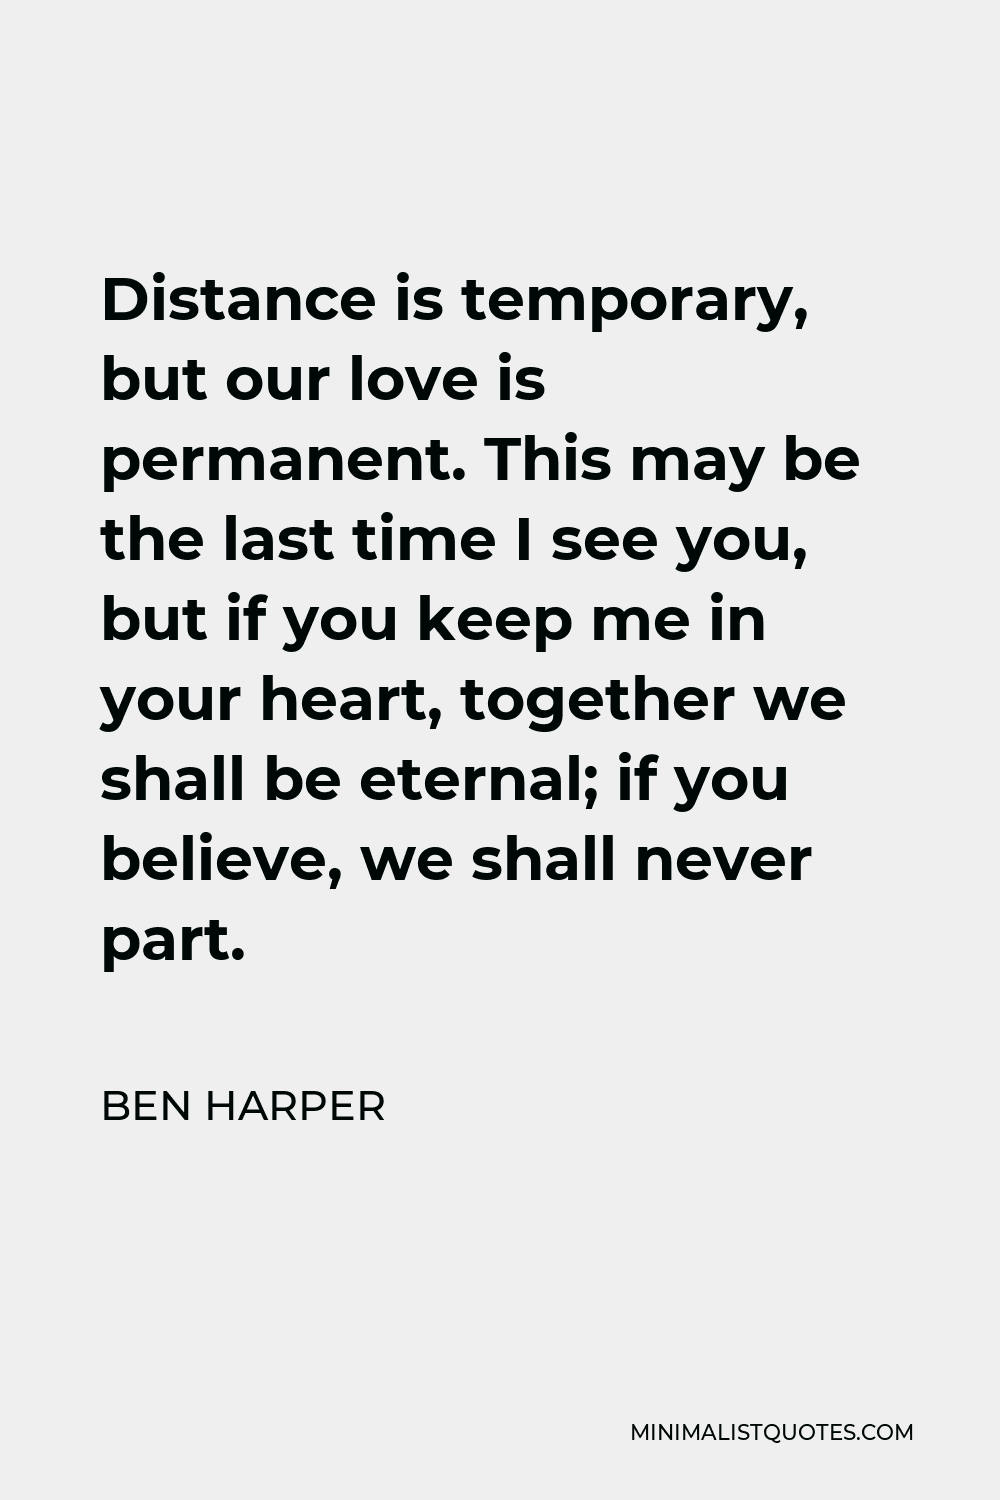 Ben Harper Quote - Distance is temporary, but our love is permanent. This may be the last time I see you, but if you keep me in your heart, together we shall be eternal; if you believe, we shall never part.